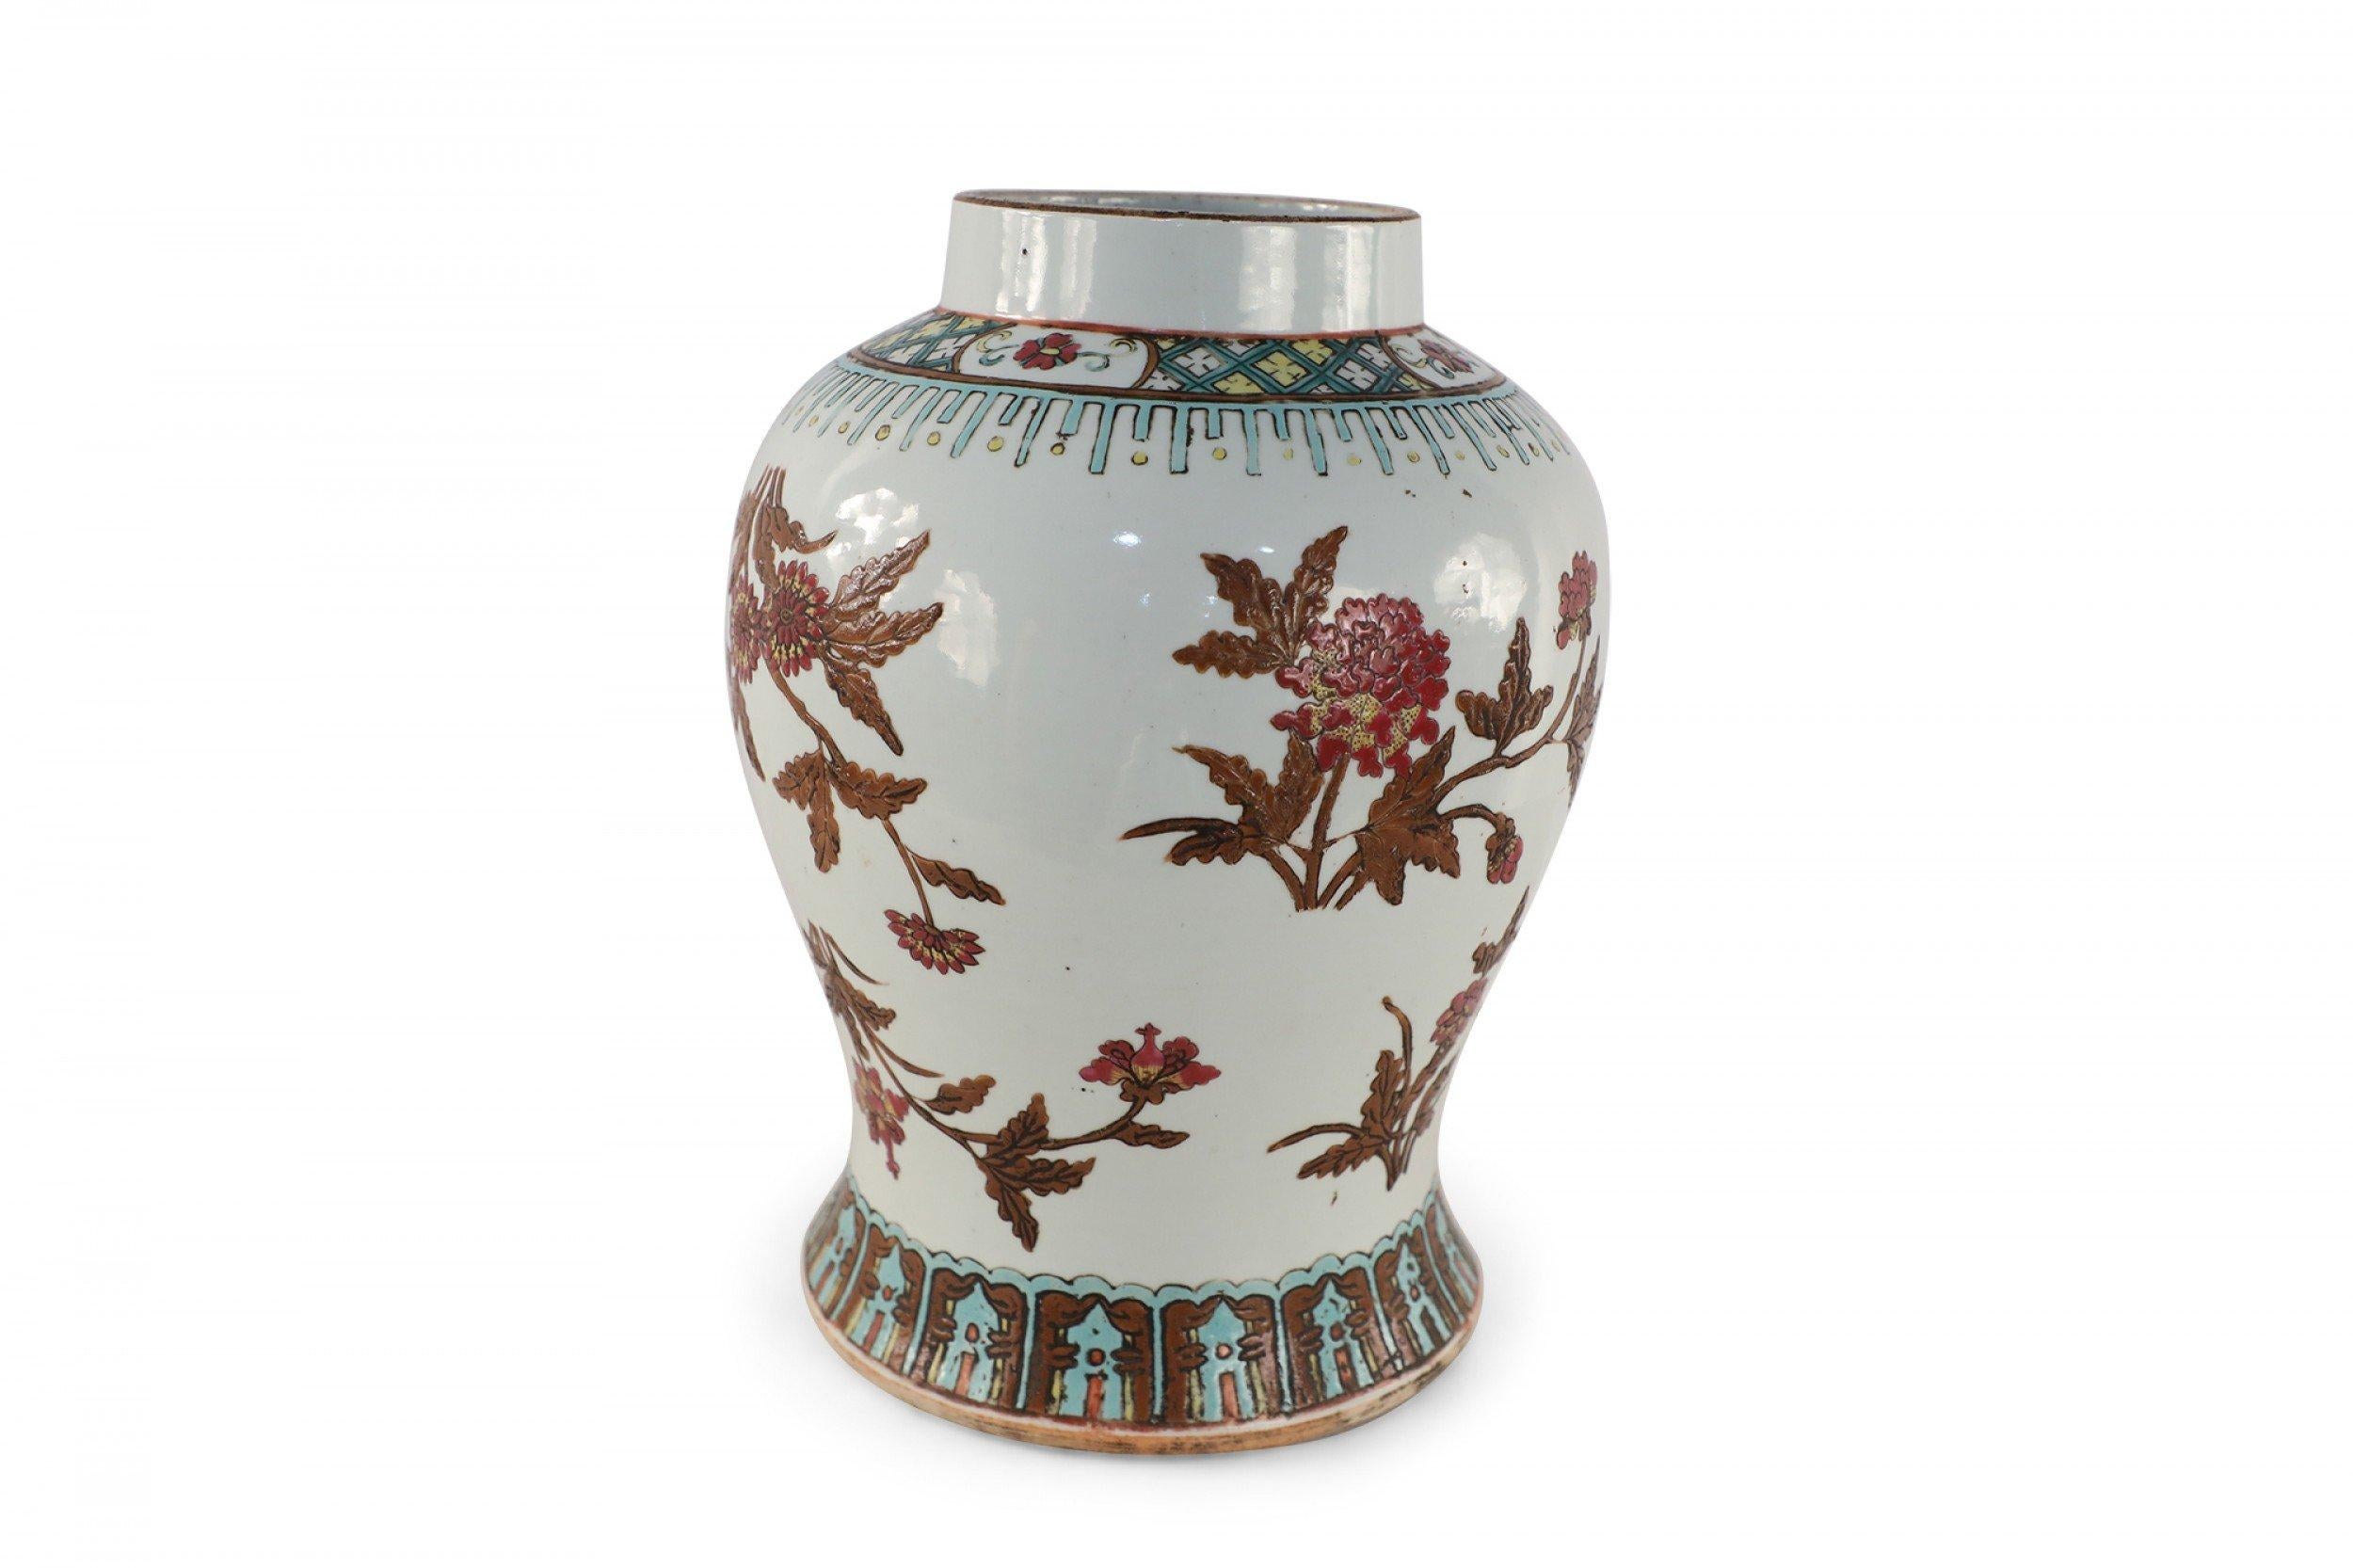 Chinese white porcelain vase decorated with an umber and pink floral motif wrapping the bulbous form, accented in blue and yellow patterned bands around the top and base.
      